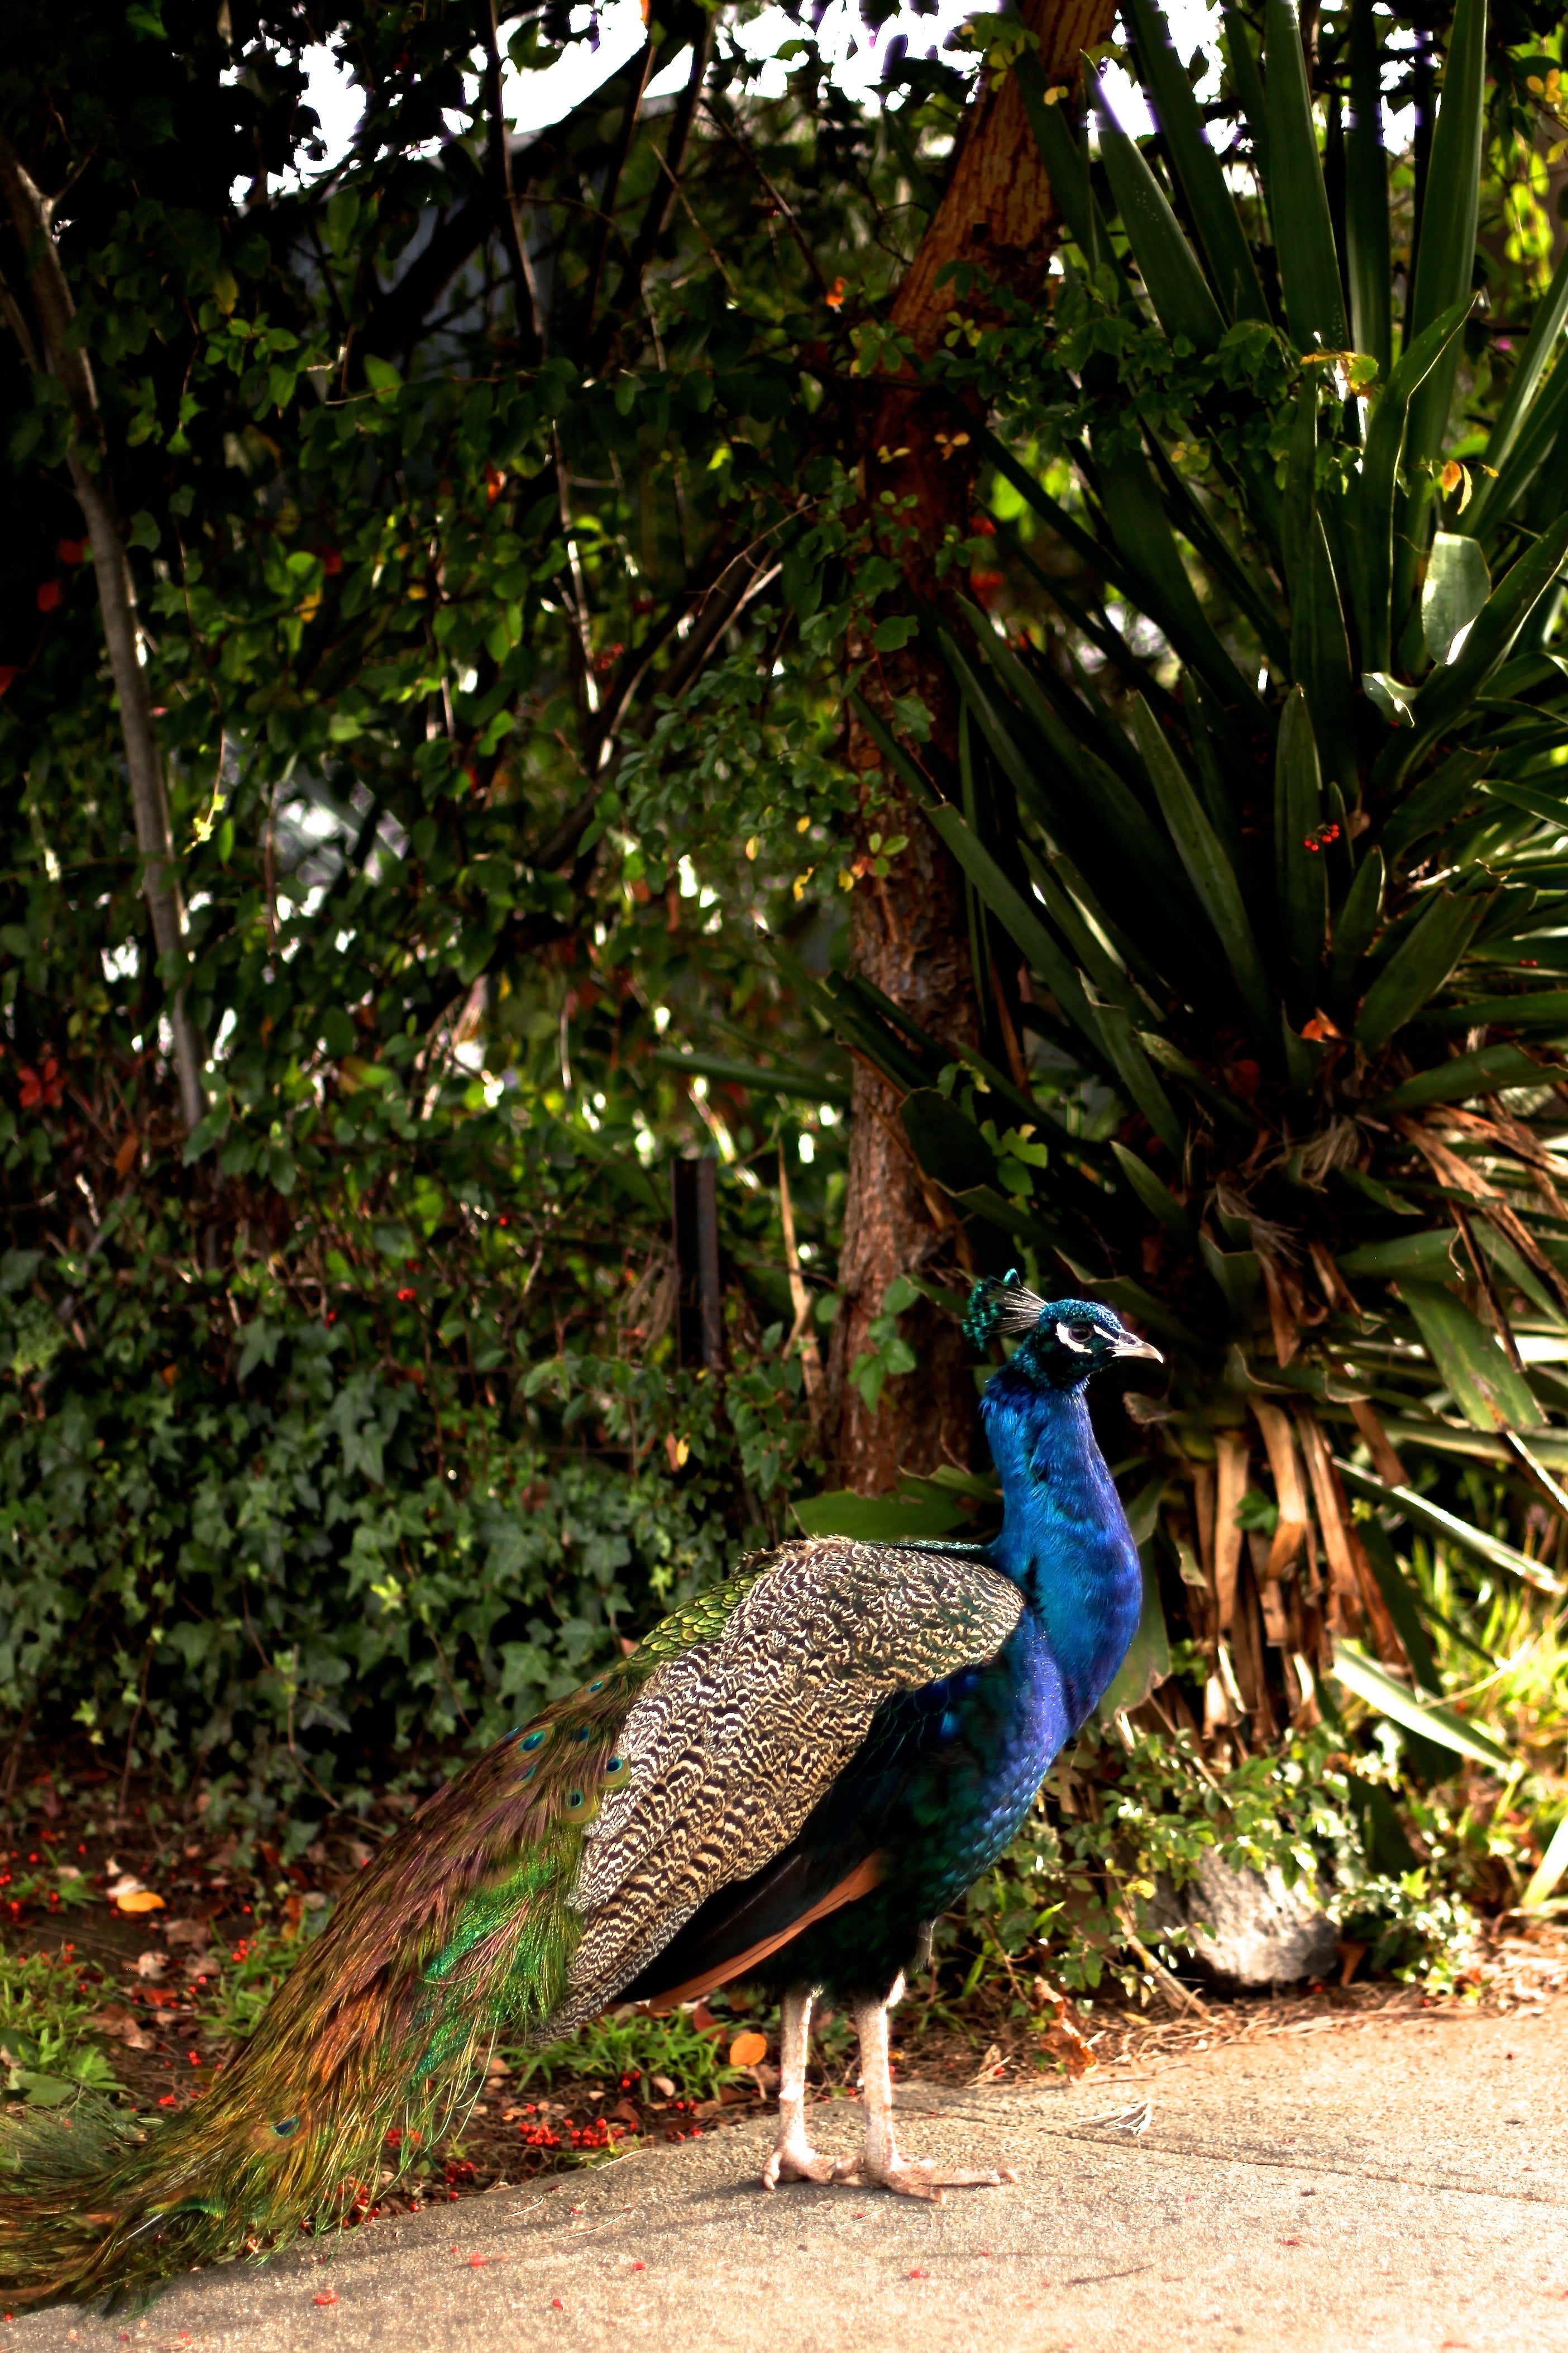 Iridescent Peacock Nº 9 & Nº 10 • Set of Two Fine Photography Prints